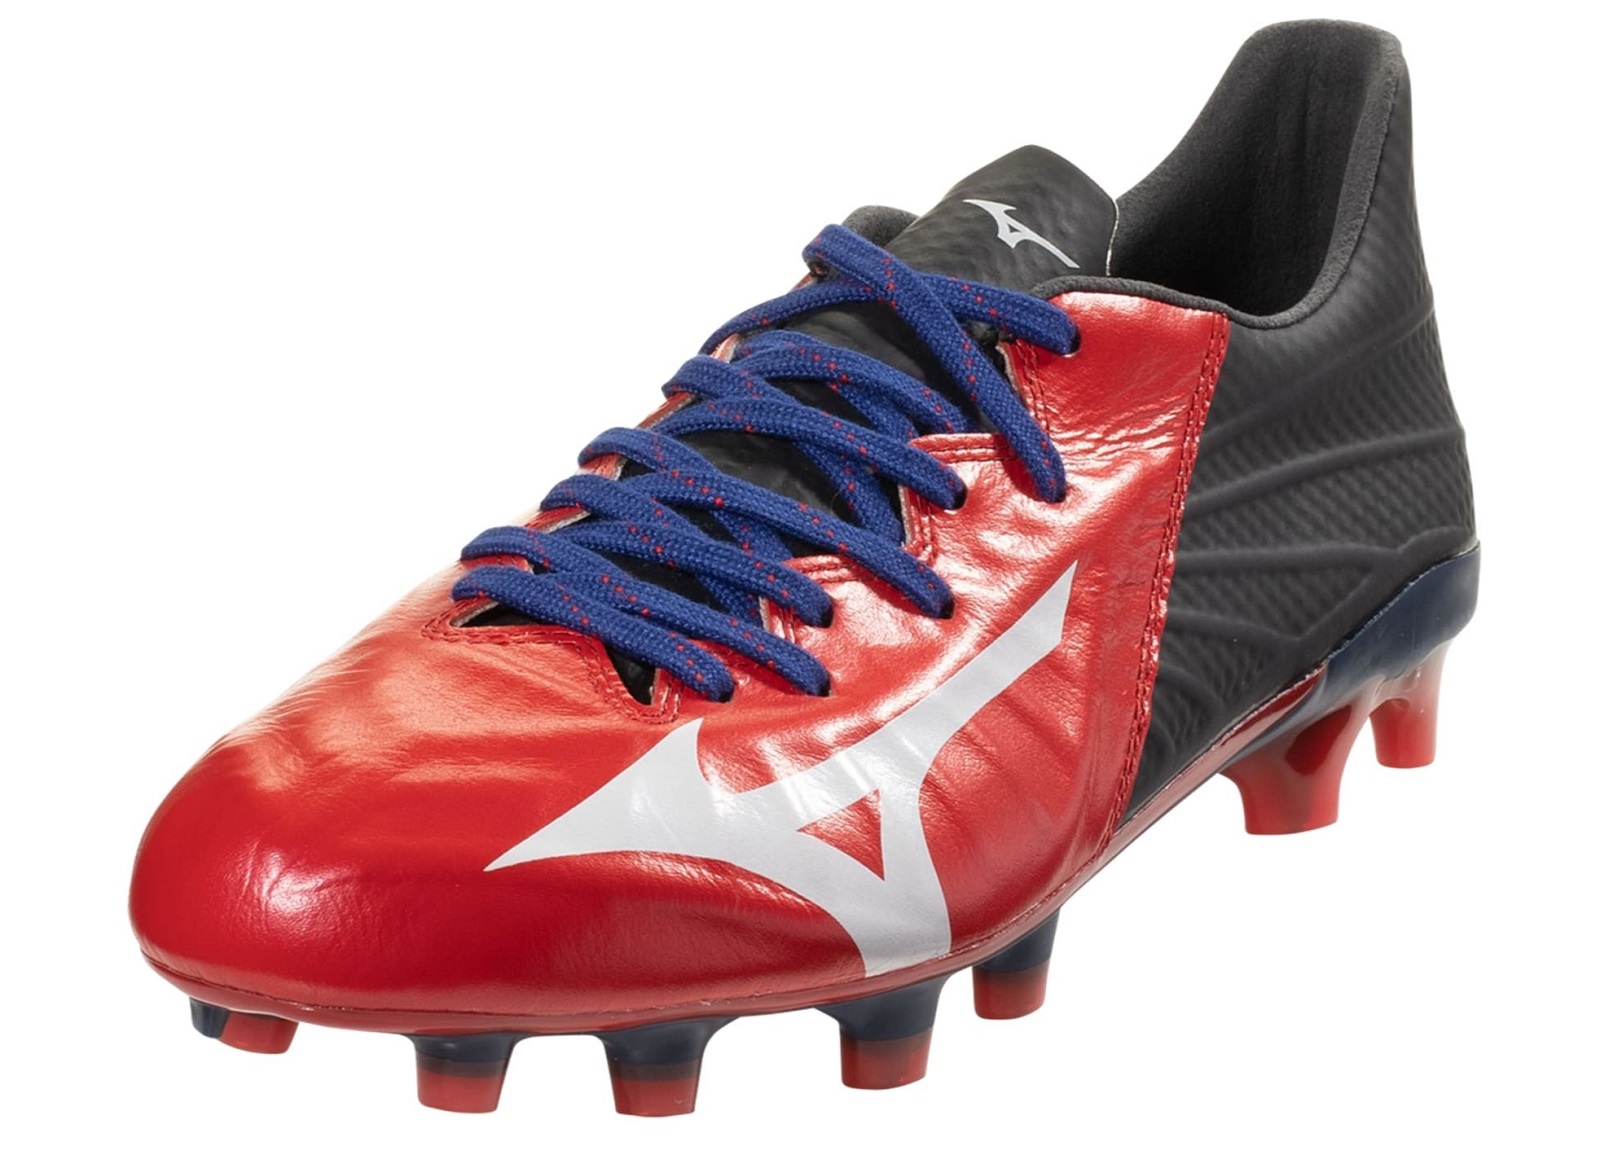 Details about   Mizuno Rebula 3 Pro MD Football Soccer Shoes Cleats Boots P1GA206414 